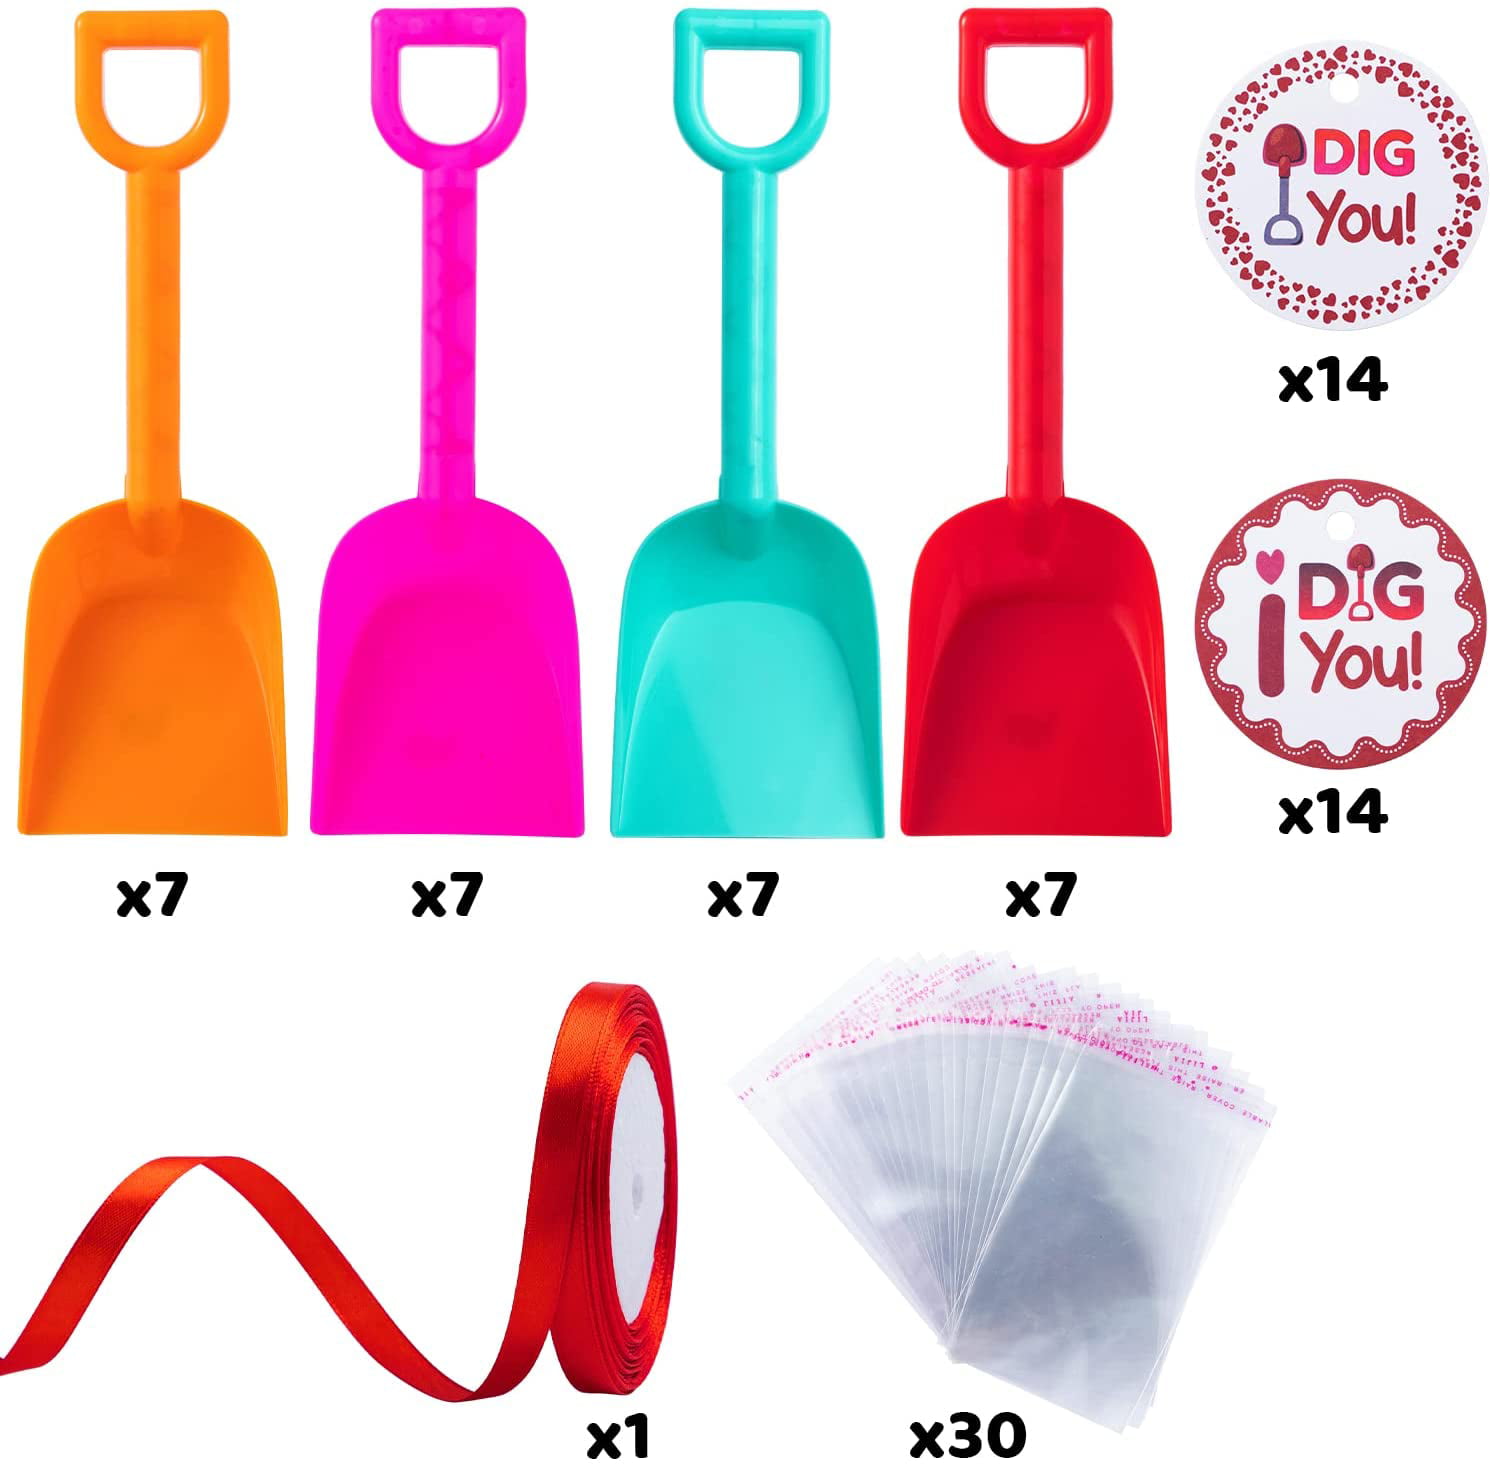 40 Valentine's Day Toy Shovels 40 I Dig you Stickers Cello Bags 80 Strips Ribbon 